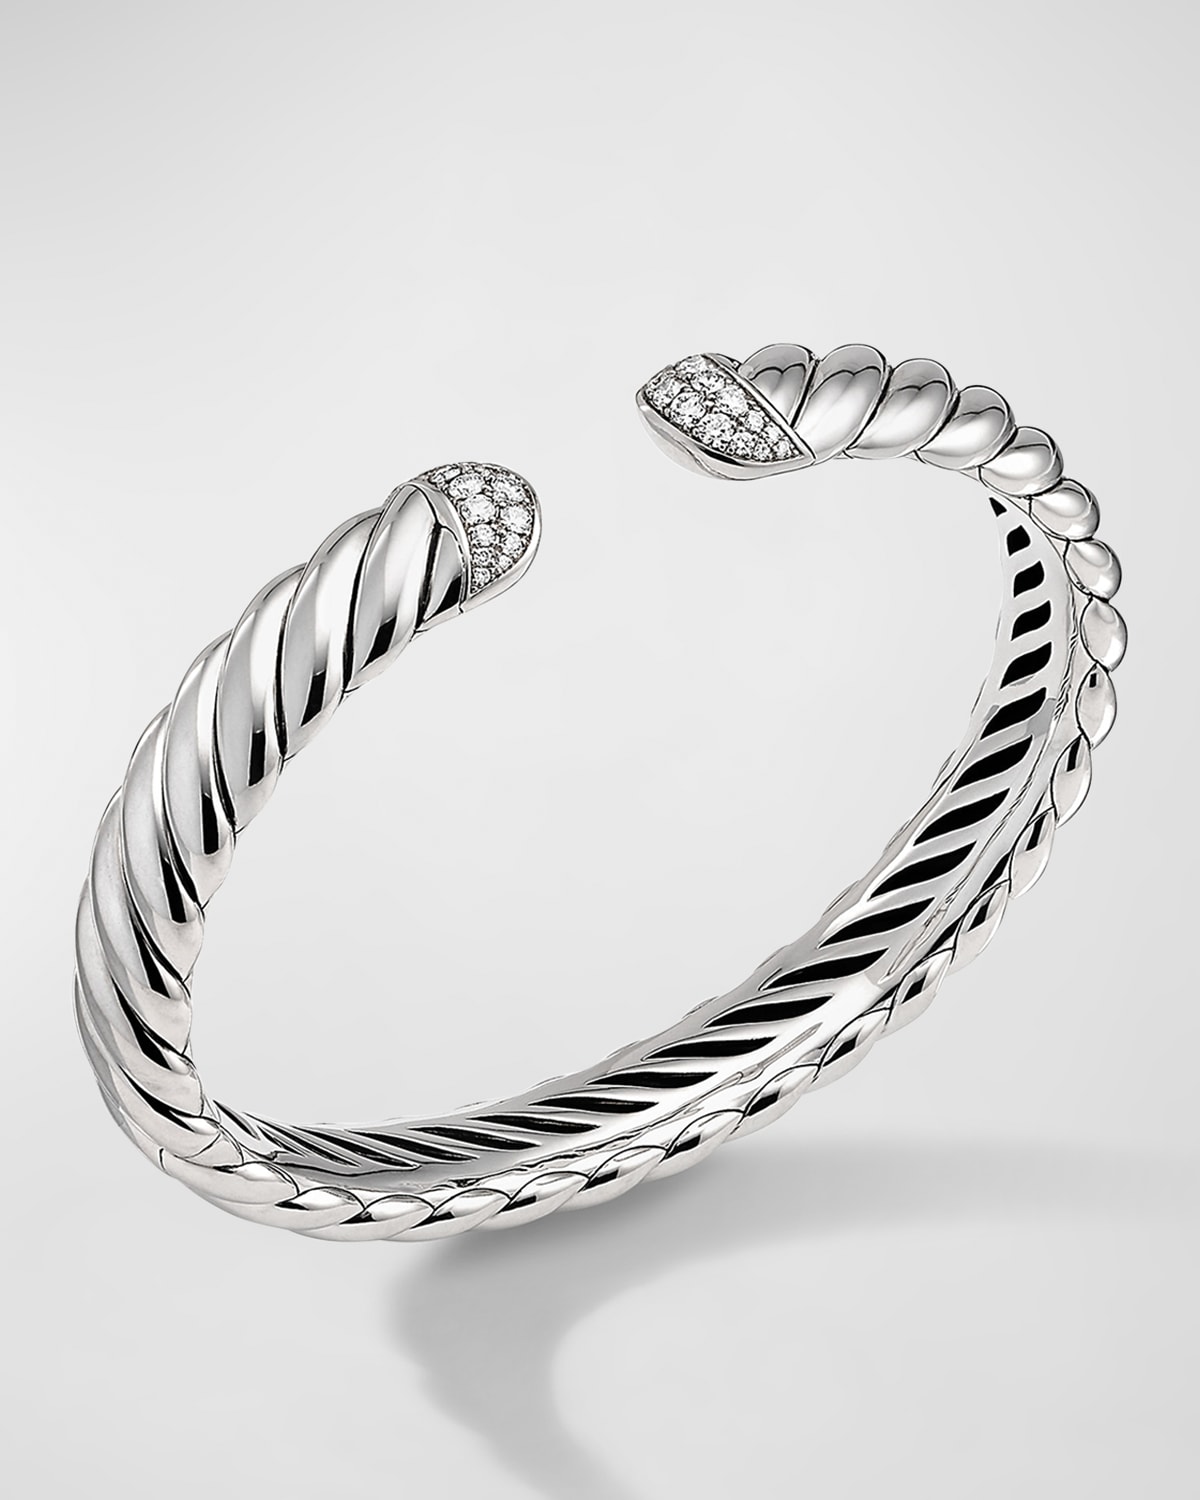 Sculpted Cable Cuff Bracelet with Pave Diamonds, 10mm